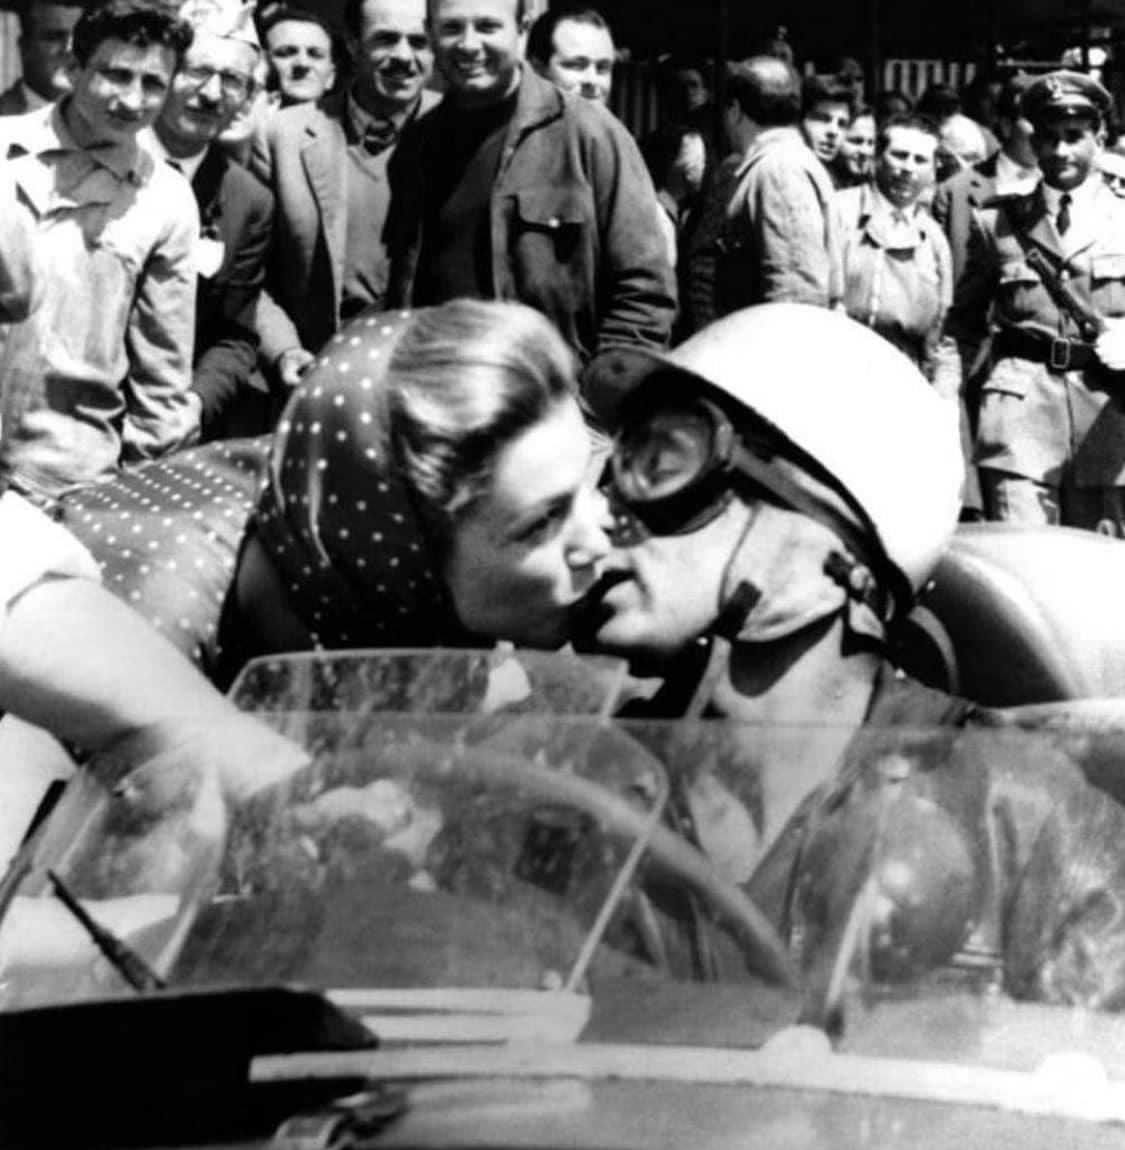 From Excitement to Tragedy: The Story Behind the Infamous "Kiss of Death" Photograph